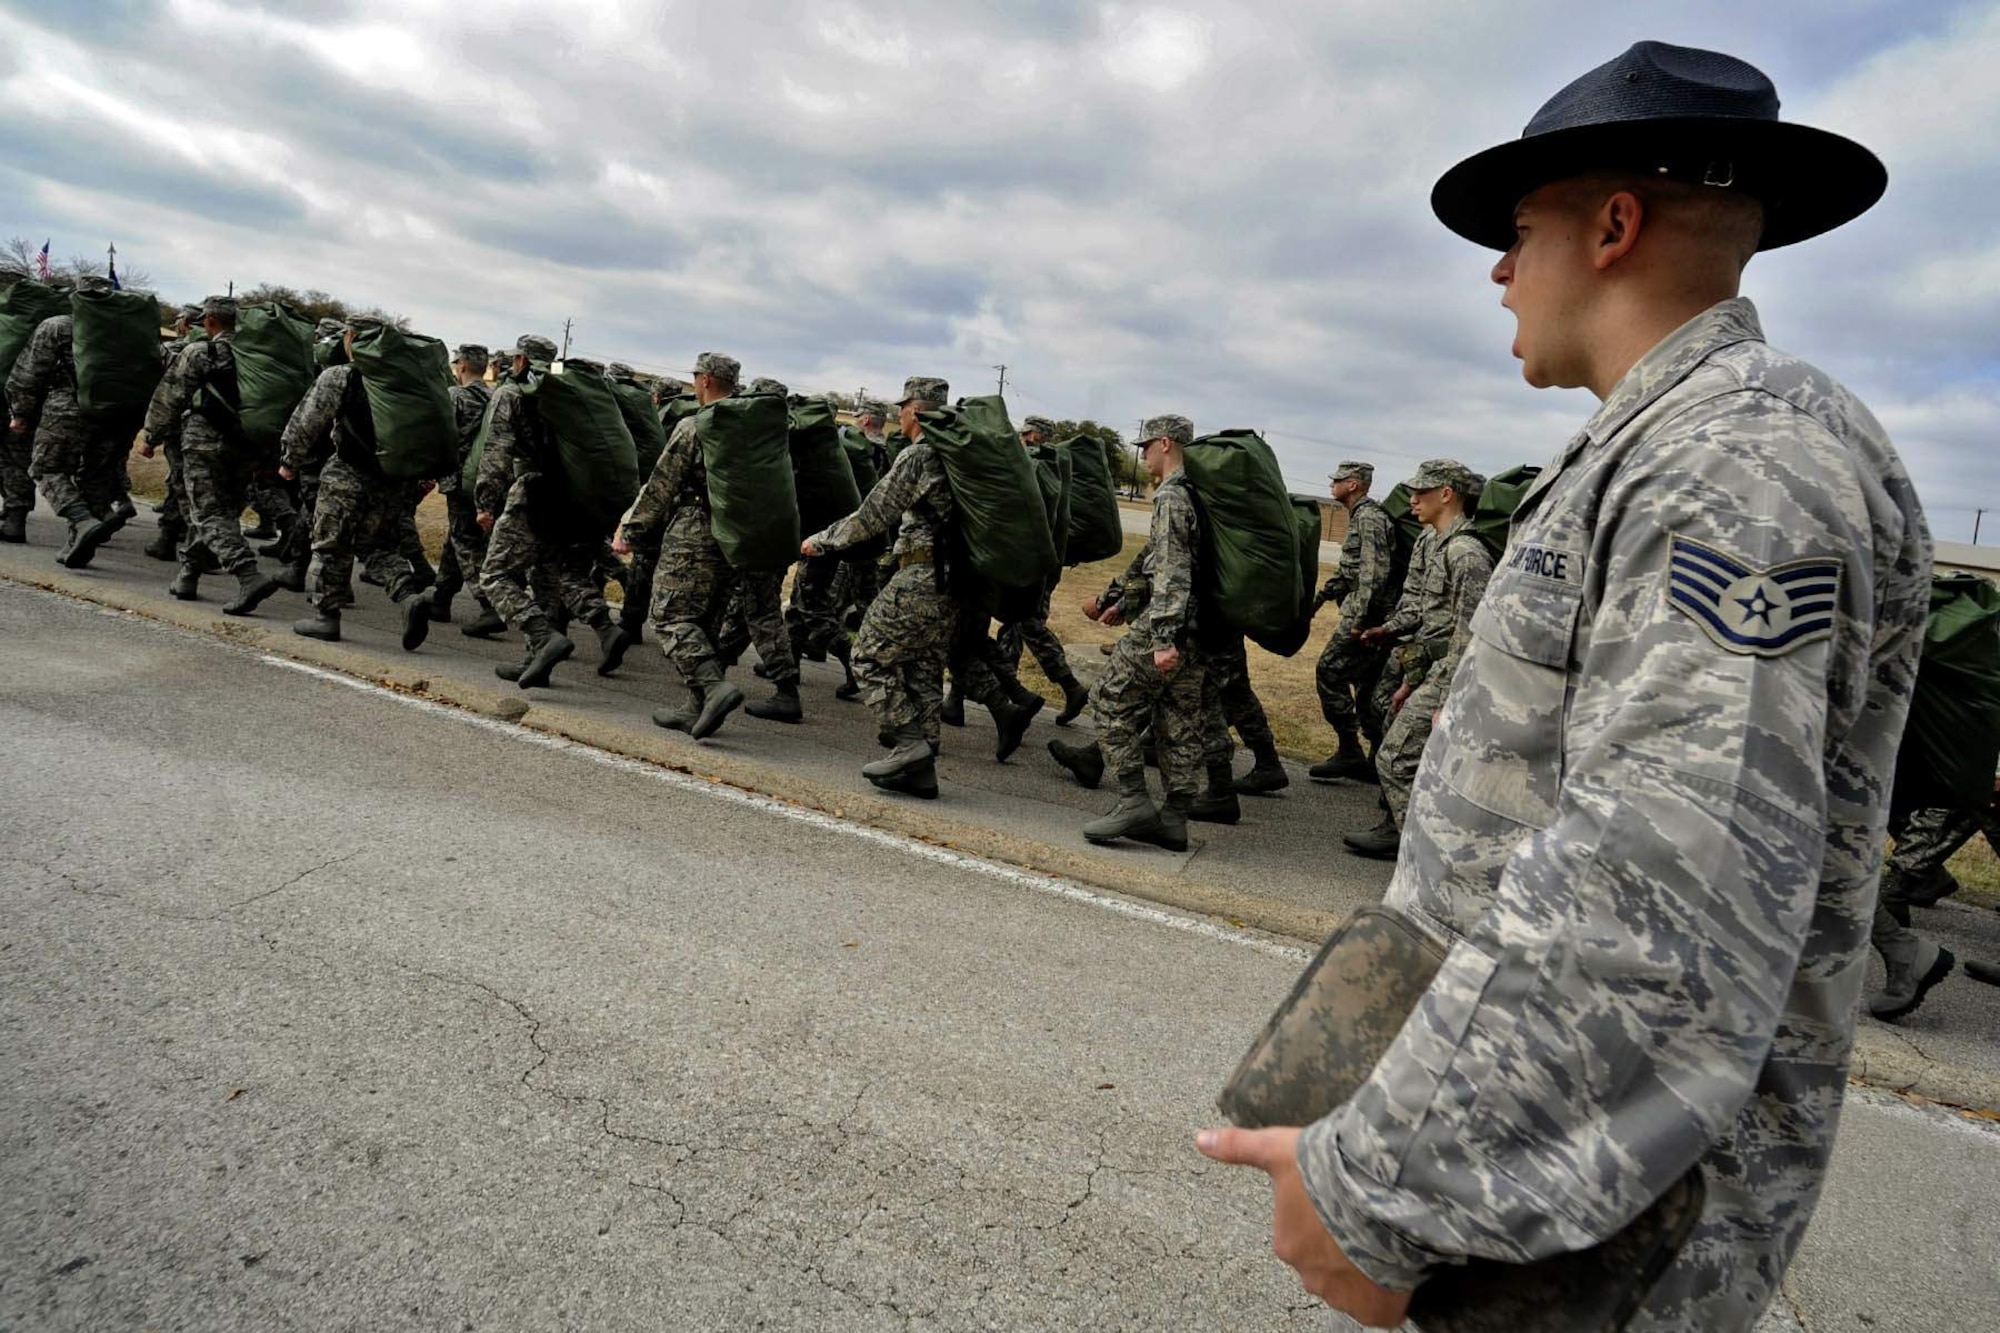 Staff Sgt. Robert George, a military training instructor at Lackland Air Force Base, Texas, marches his unit following the issuance of uniforms and gear.  Recruits are molded into warrior Airmen through a recently expanded Air Force Basic Military Training program. (U.S. Air Force photo/Master Sgt. Cecilio Ricardo)